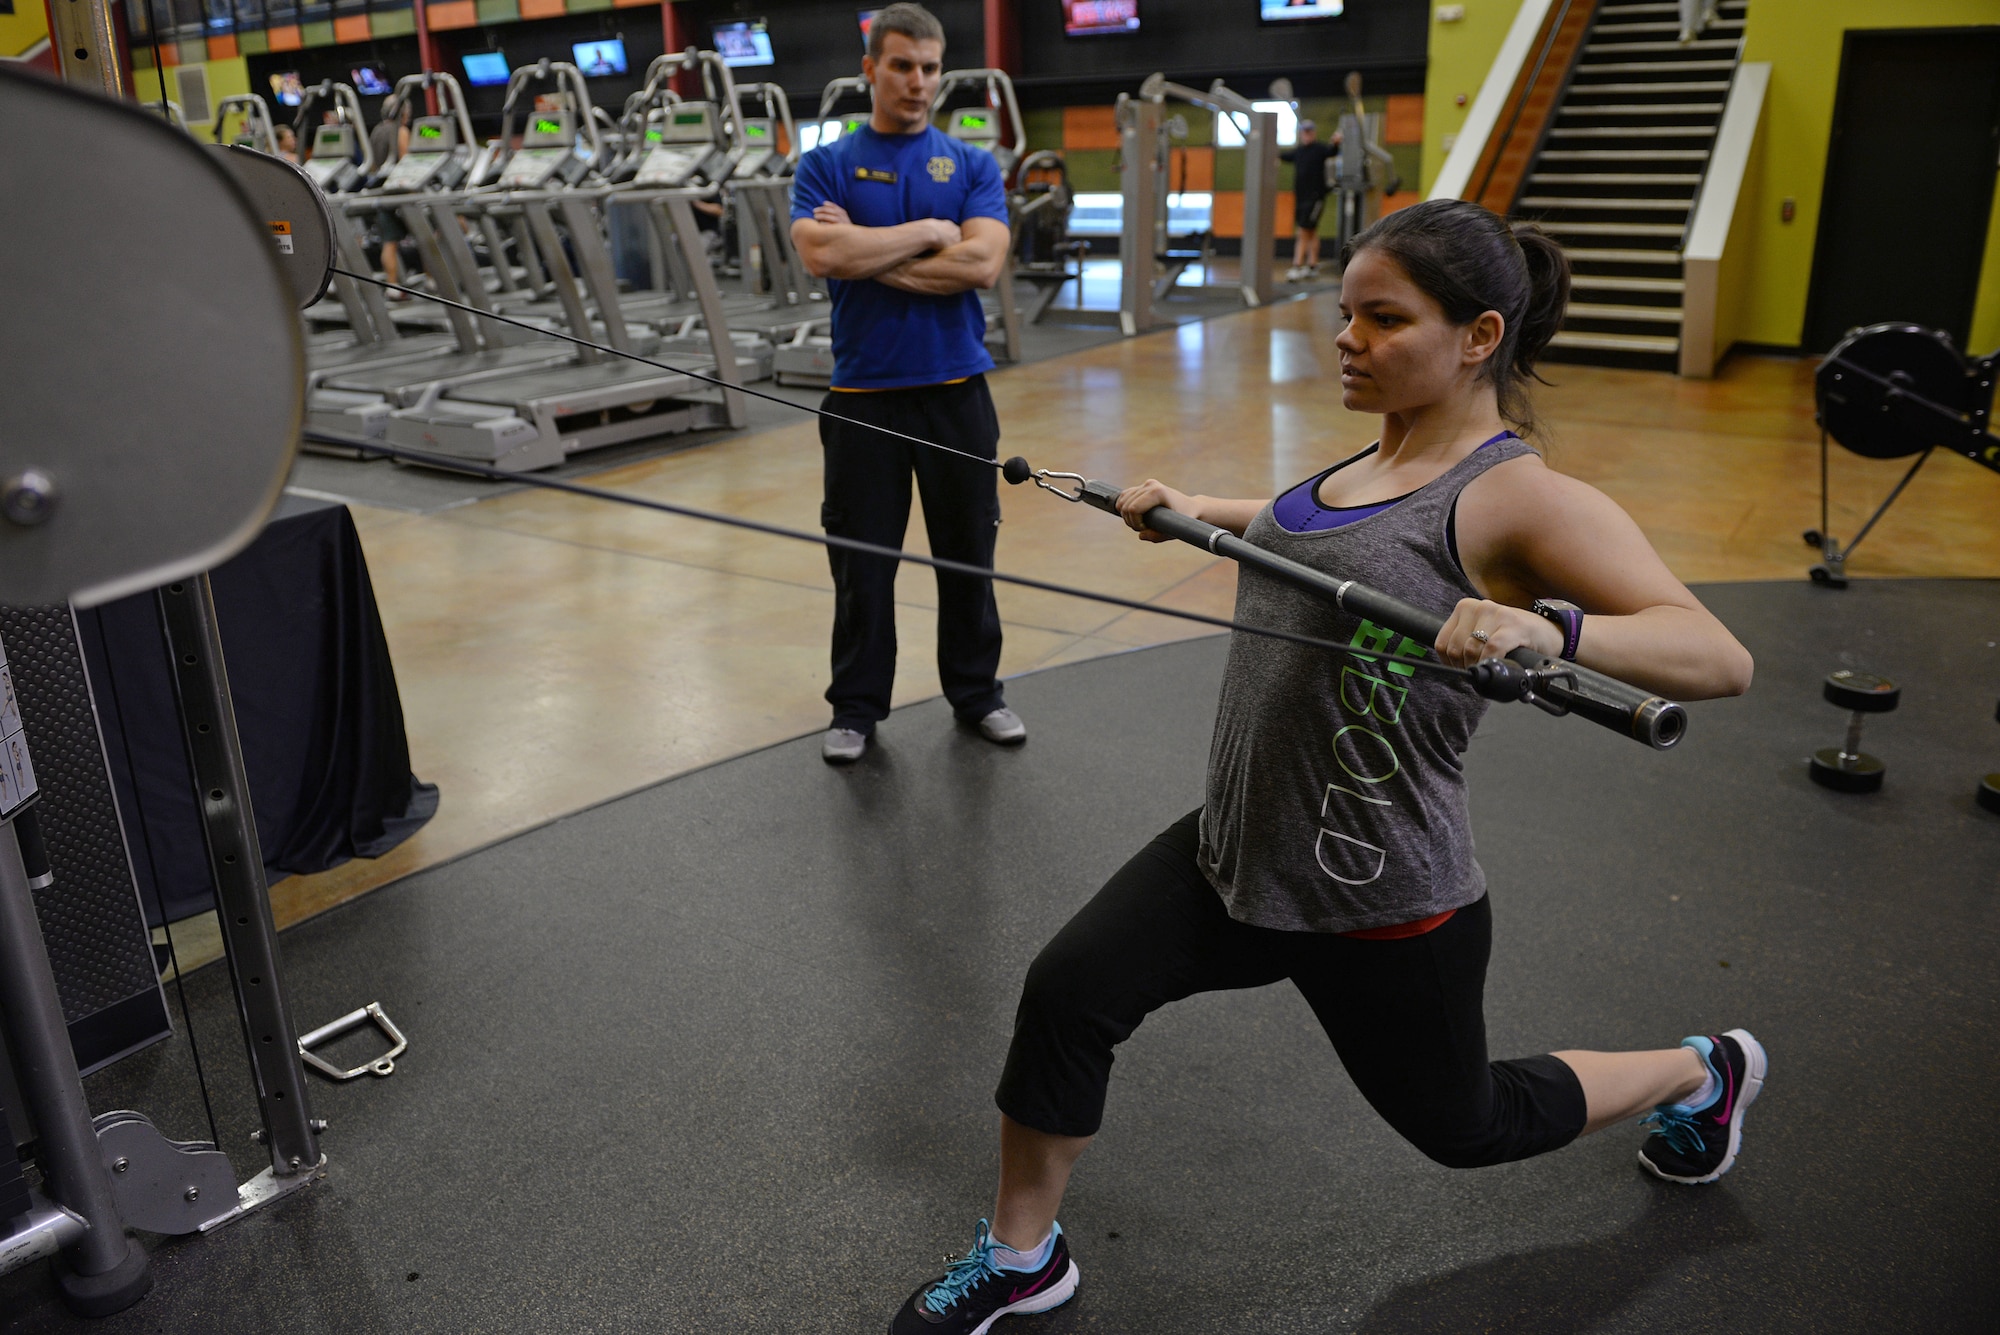 Jessi McNulty, 26, uses an upper body machine while her personal trainer Nate Myers watches her for correct form, O’Fallon, Ill., Jan. 22, 2015. This Air Force spouse has been hitting this gym for nearly two years, during which time she has lost 90 pounds despite having temporal lobe epilepsy. Generally her workouts are total body-oriented. She and Myers monitor her heart rate to mitigate her seizures, which are exercise-induced. (U.S. Air Force photo by Airman 1st Class Erica Crossen)